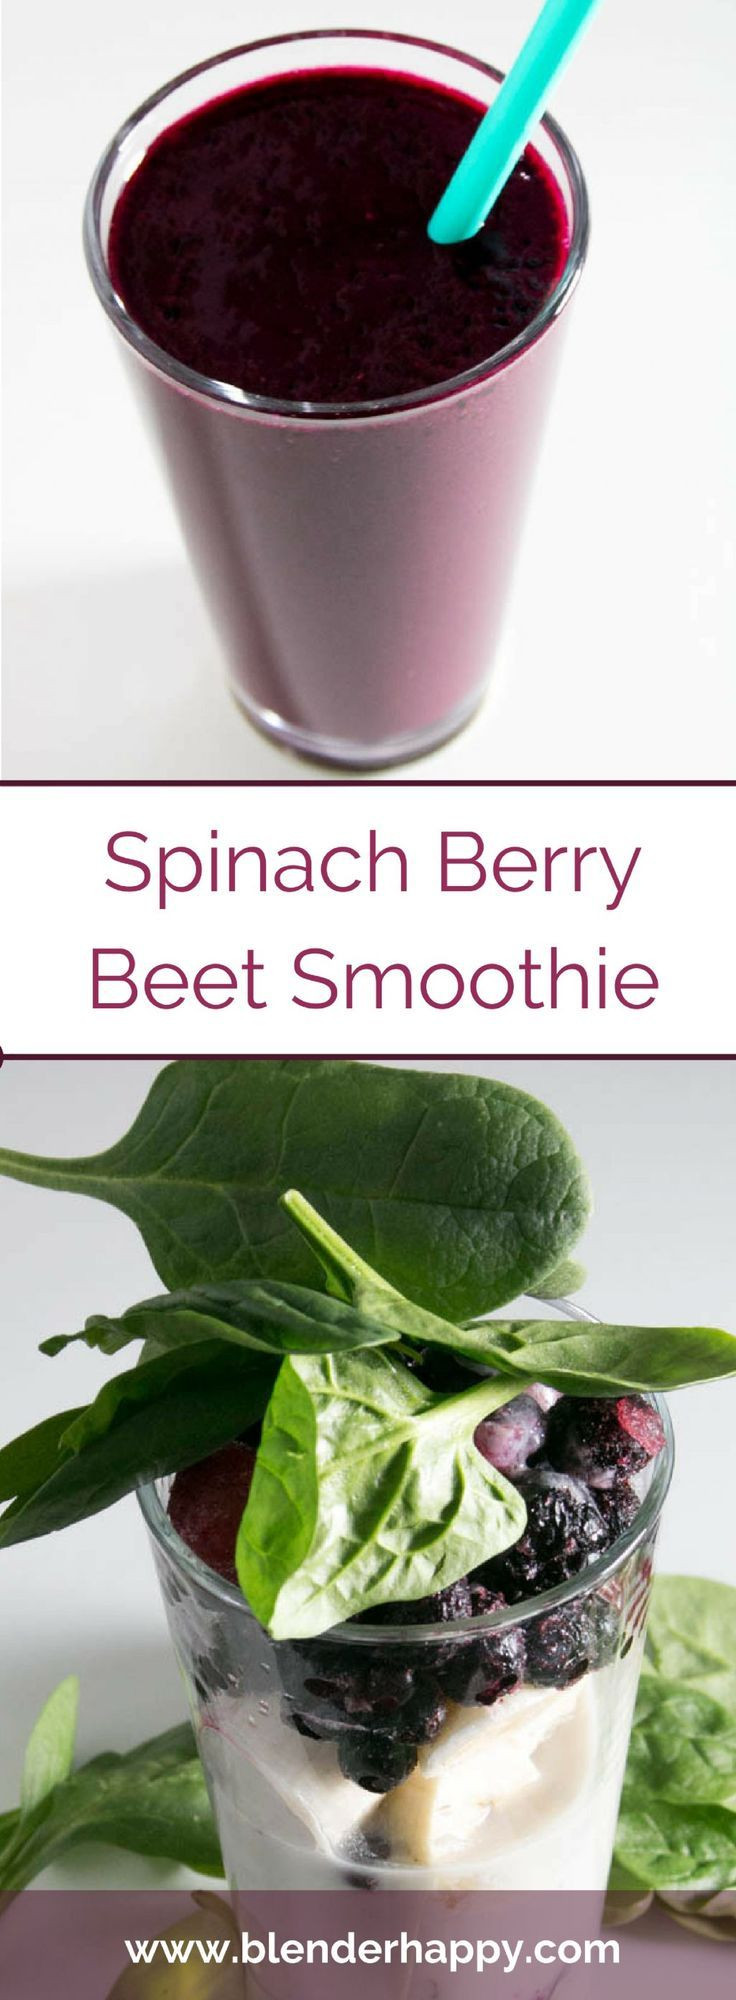 Healthy Smoothie Recipes With Spinach
 Best 25 Beet smoothie ideas on Pinterest